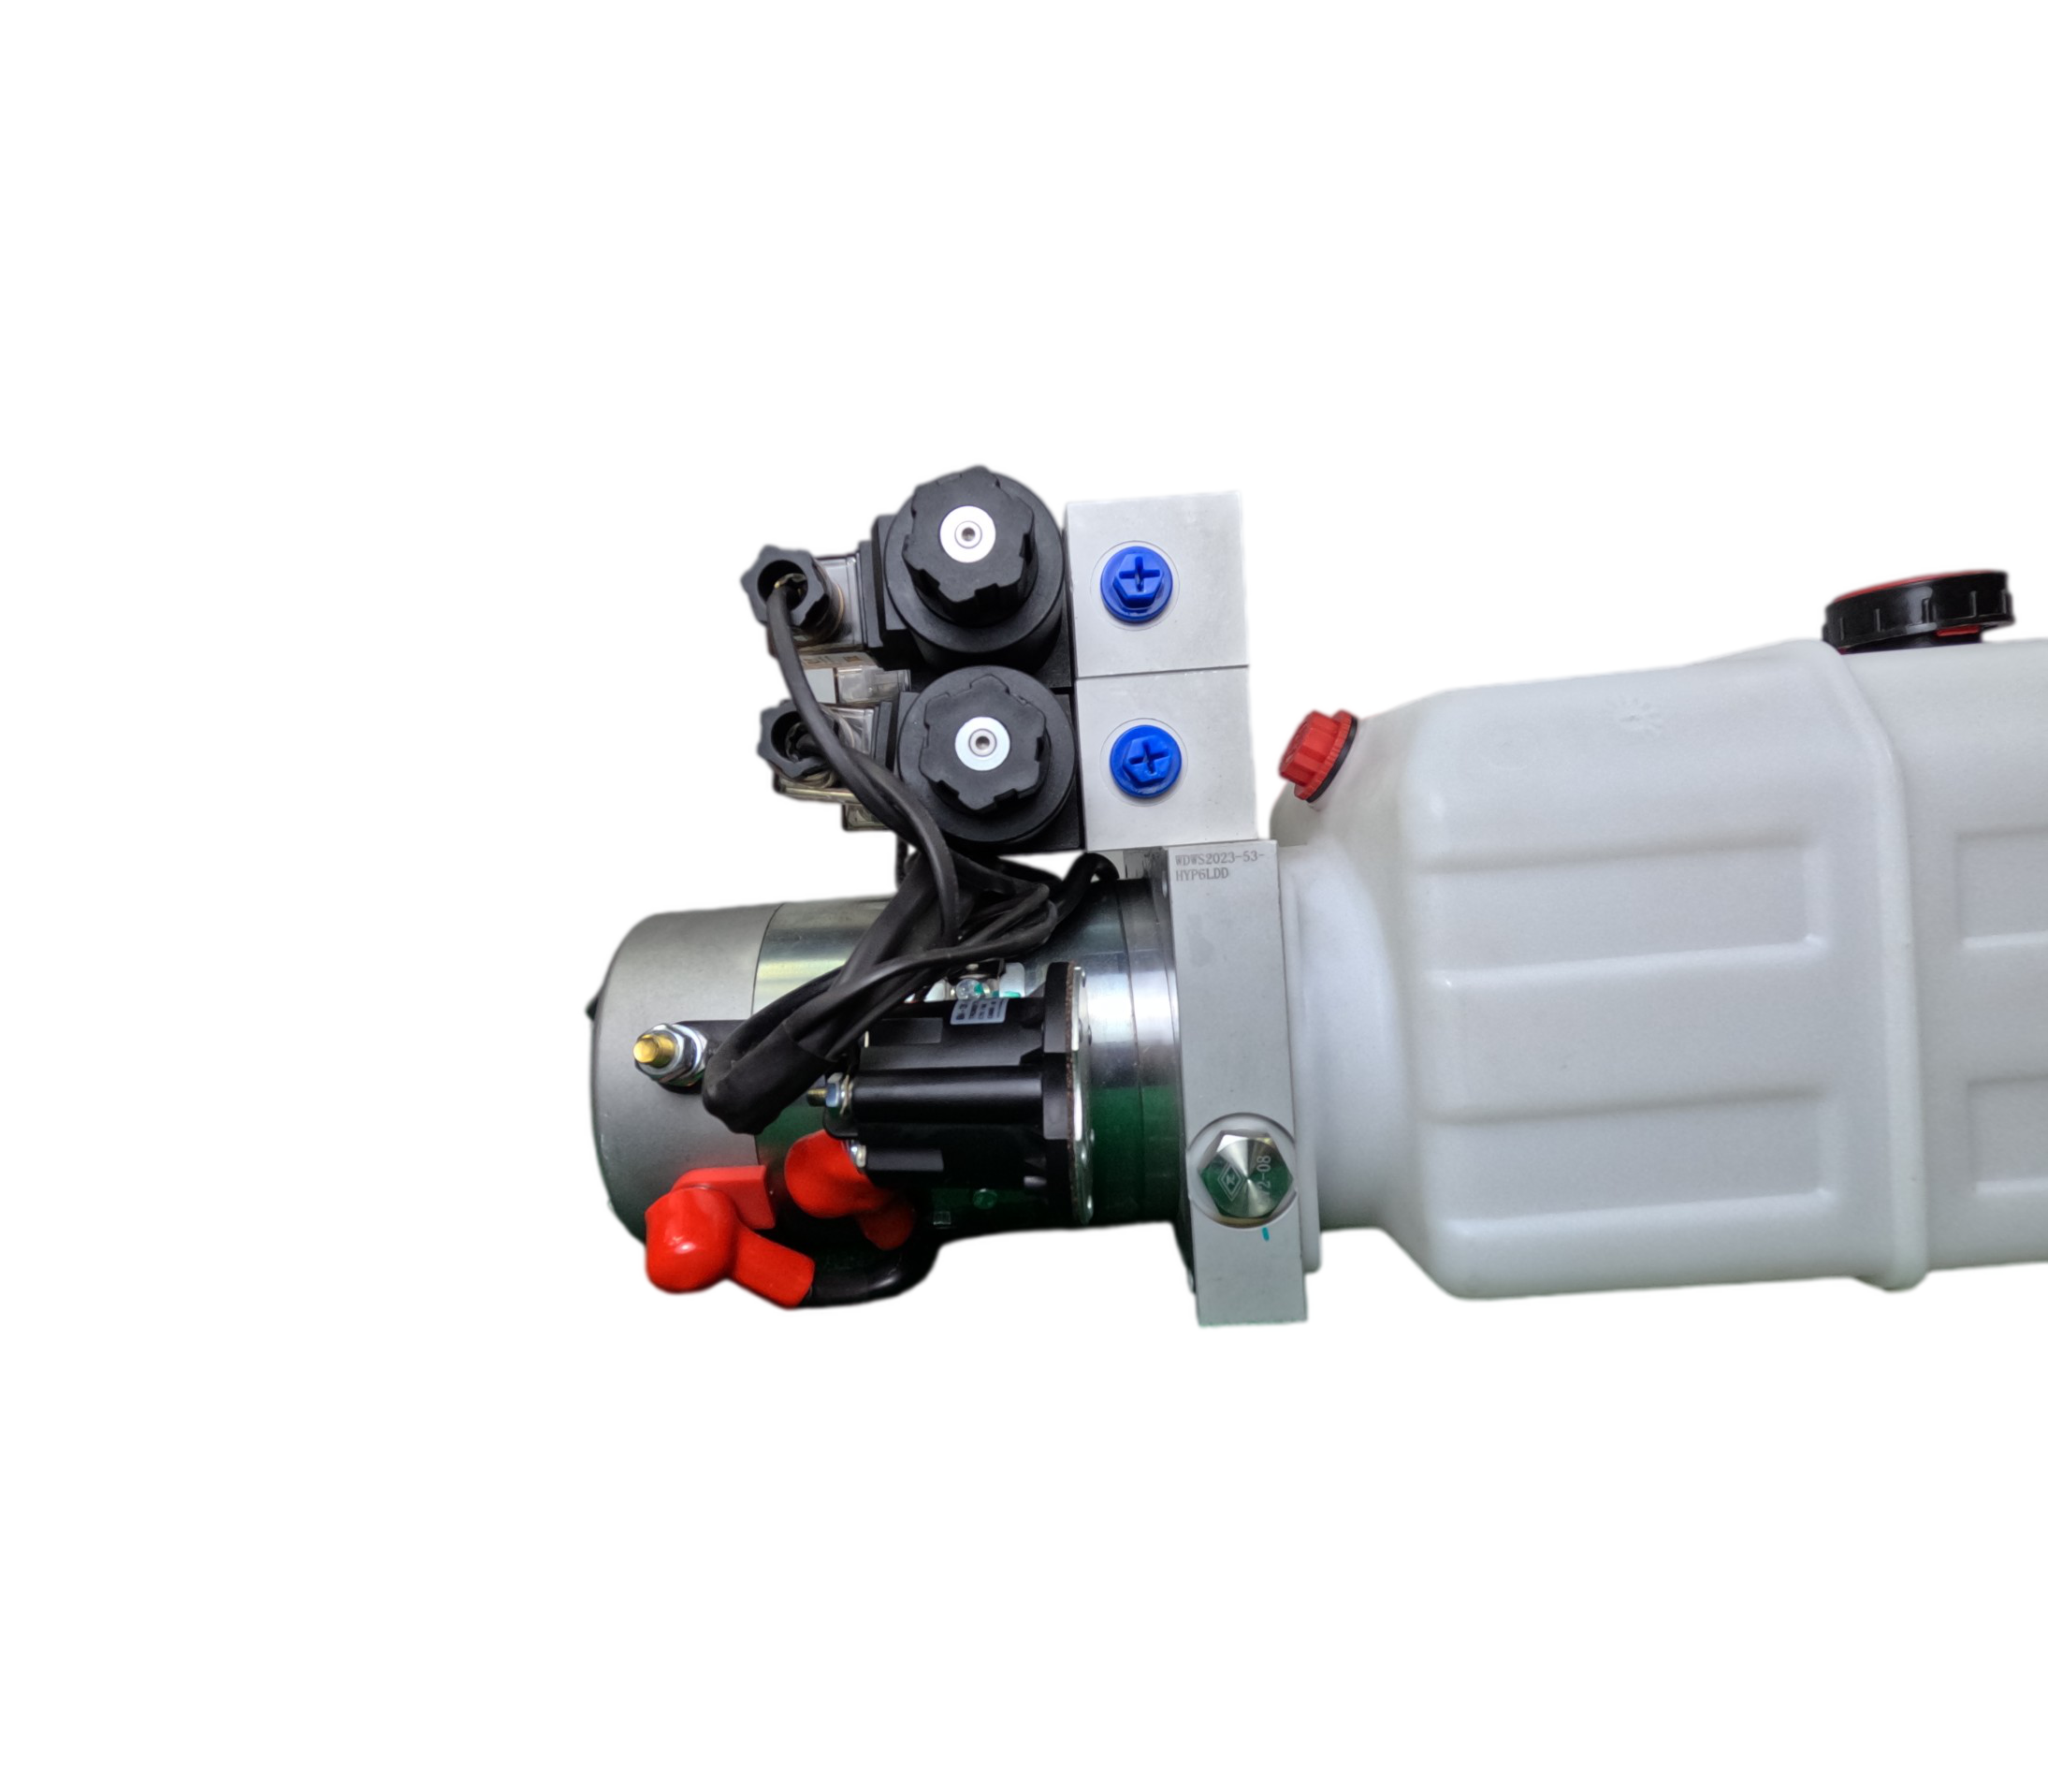 Compact Dual Double Hydraulic Power Unit from PrimaryMover.com: Quad power capability for dump trailers and trucks, robust construction, versatile applications, and user-friendly controls for efficient hydraulic operations.